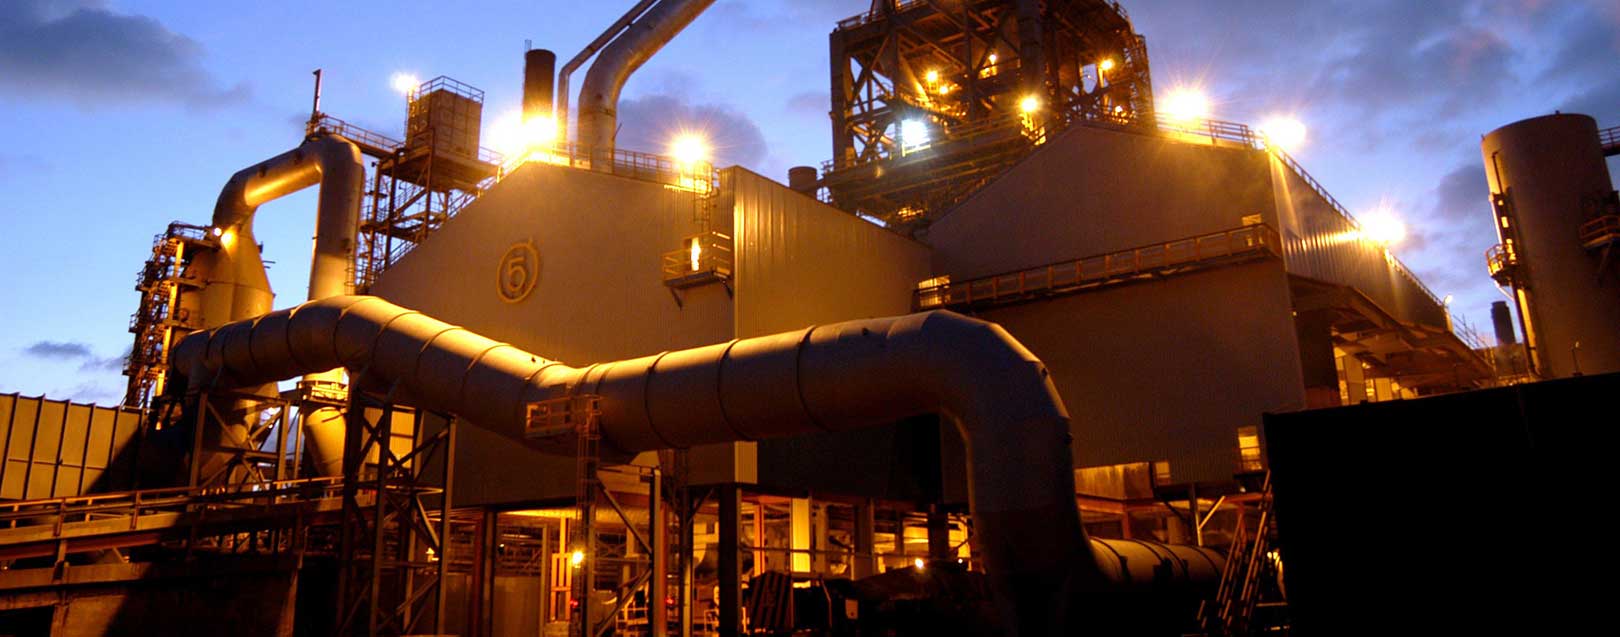 Tata Steel announces 10-year investment plan for UK